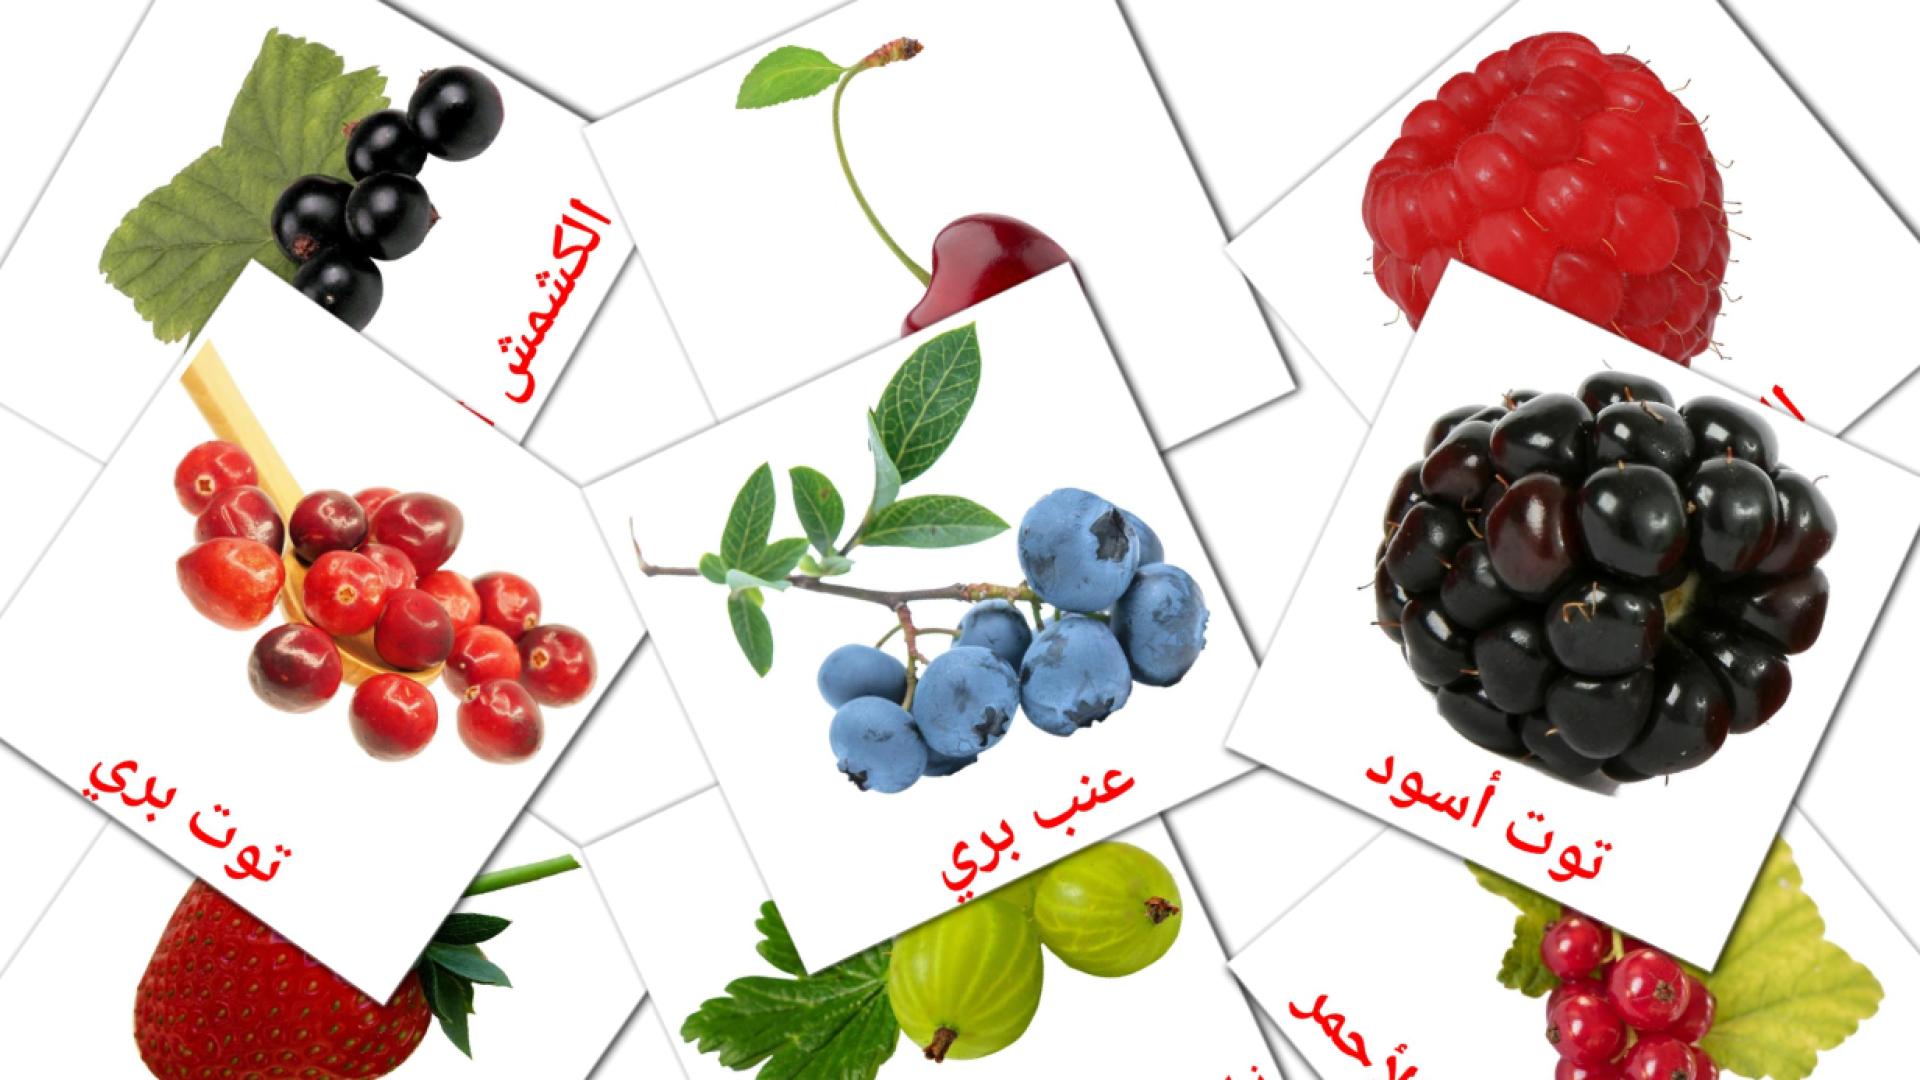 Berries - arabic vocabulary cards